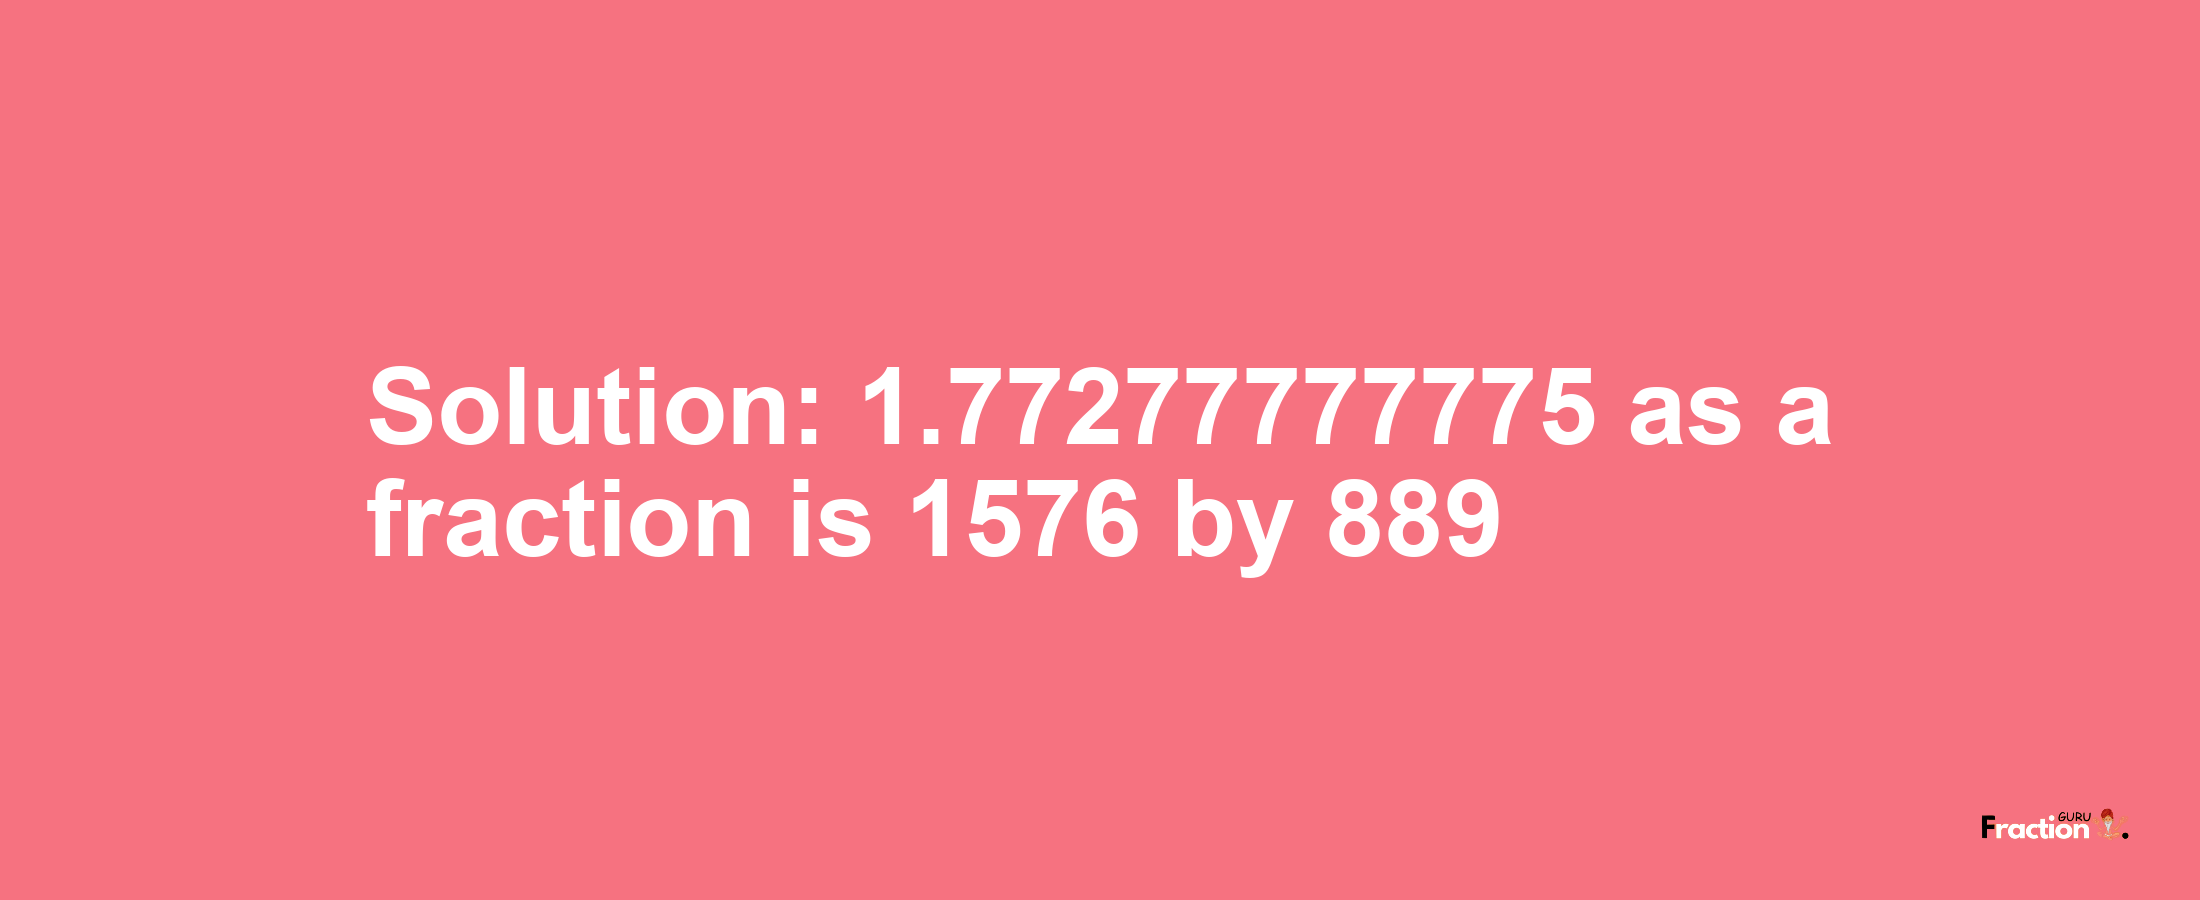 Solution:1.77277777775 as a fraction is 1576/889